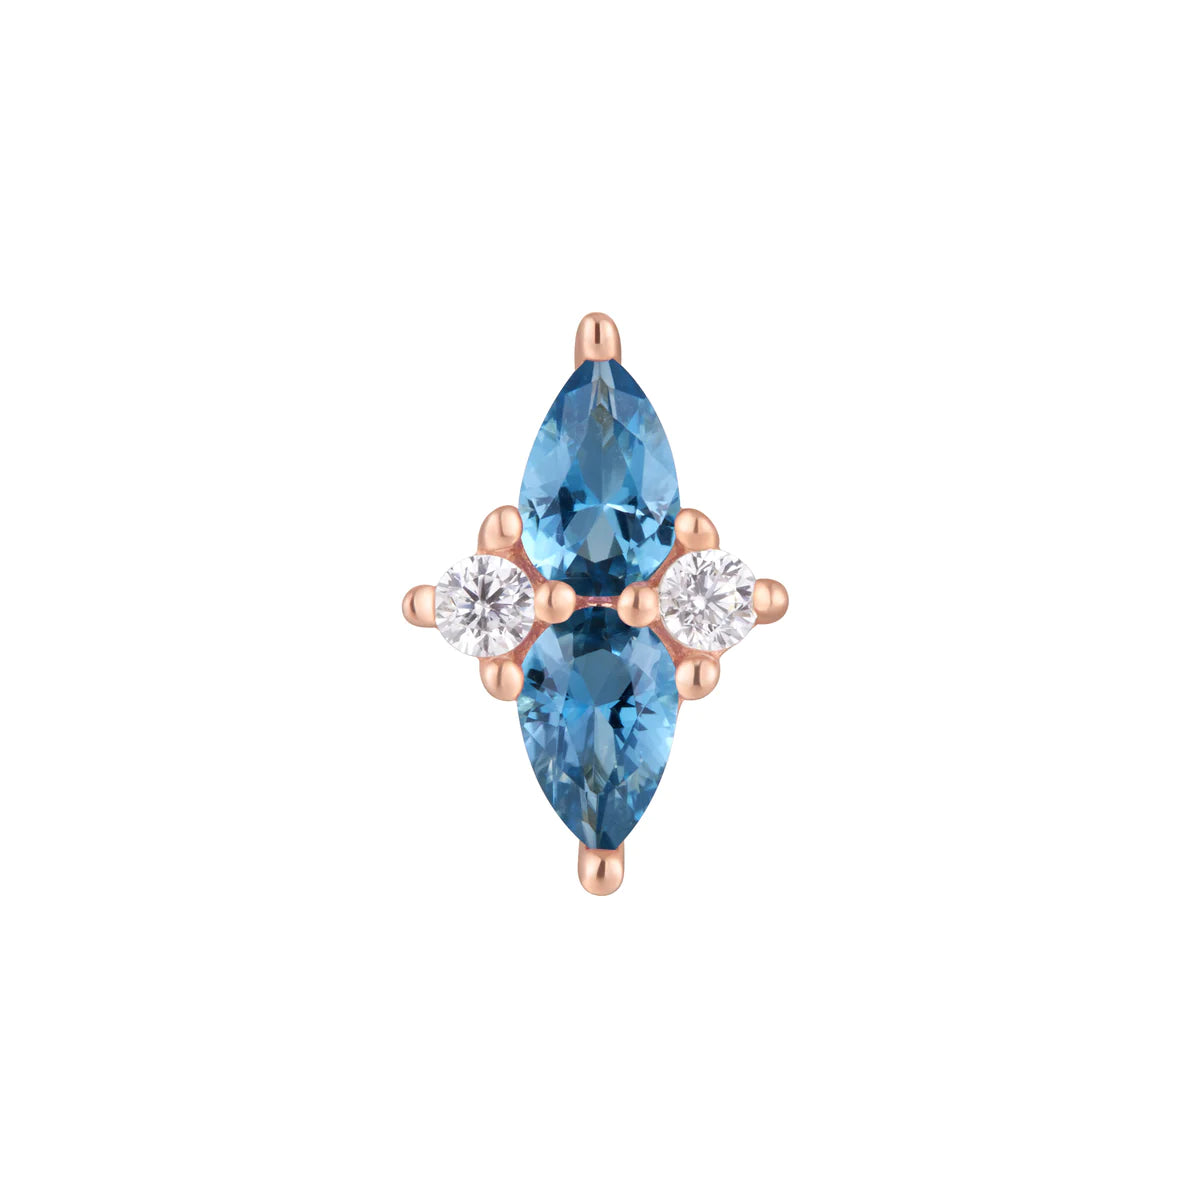 BUDDHA JEWELRY - ETHEREAL - LONDON BLUE TOPAZ + CZ - 14KT SOLID GOLD - THREADLESS END